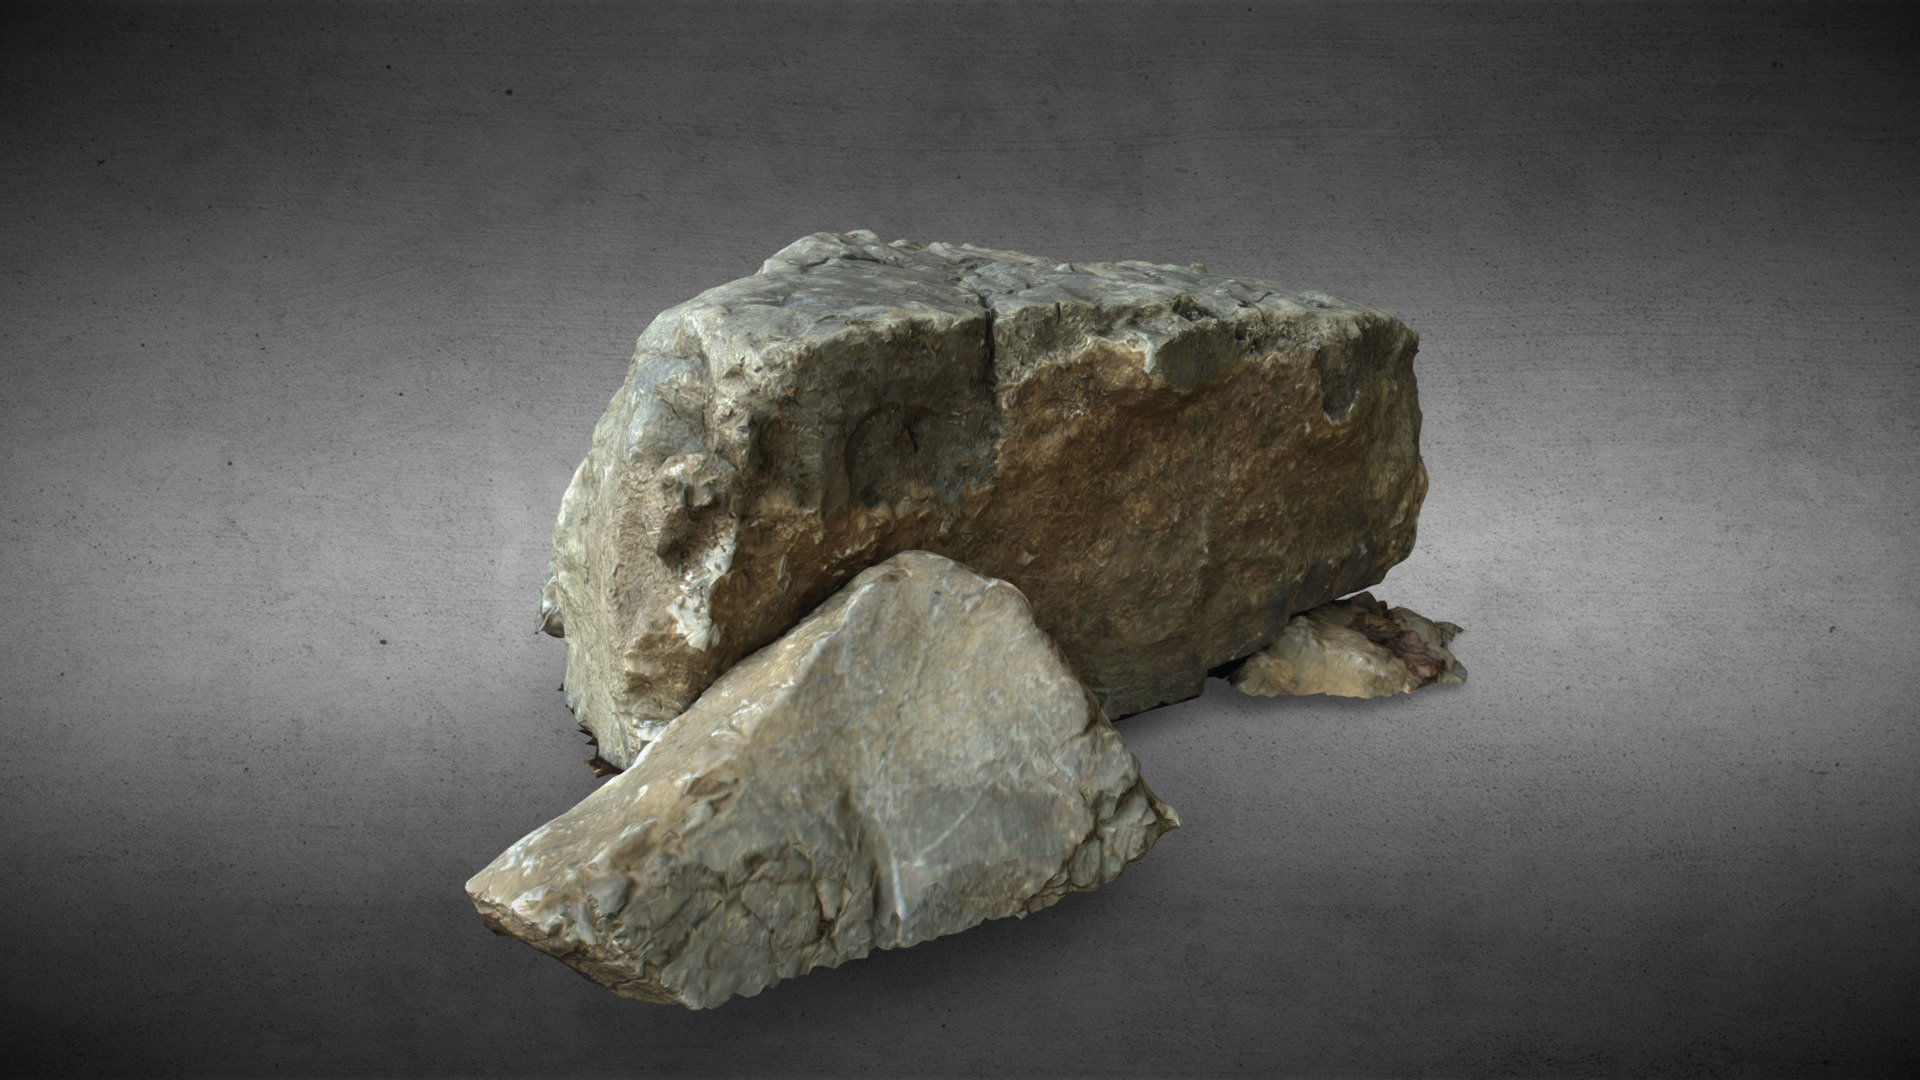 A photogrammetry capture of a stone in Pieniny Mountains in Poland. 90 photos were used in creation and the overall scene is bigger (with leaves, branches and smaller stones lying around), but the size of the file well exceeds 50mb so I had to make some drastic cuts 3d model